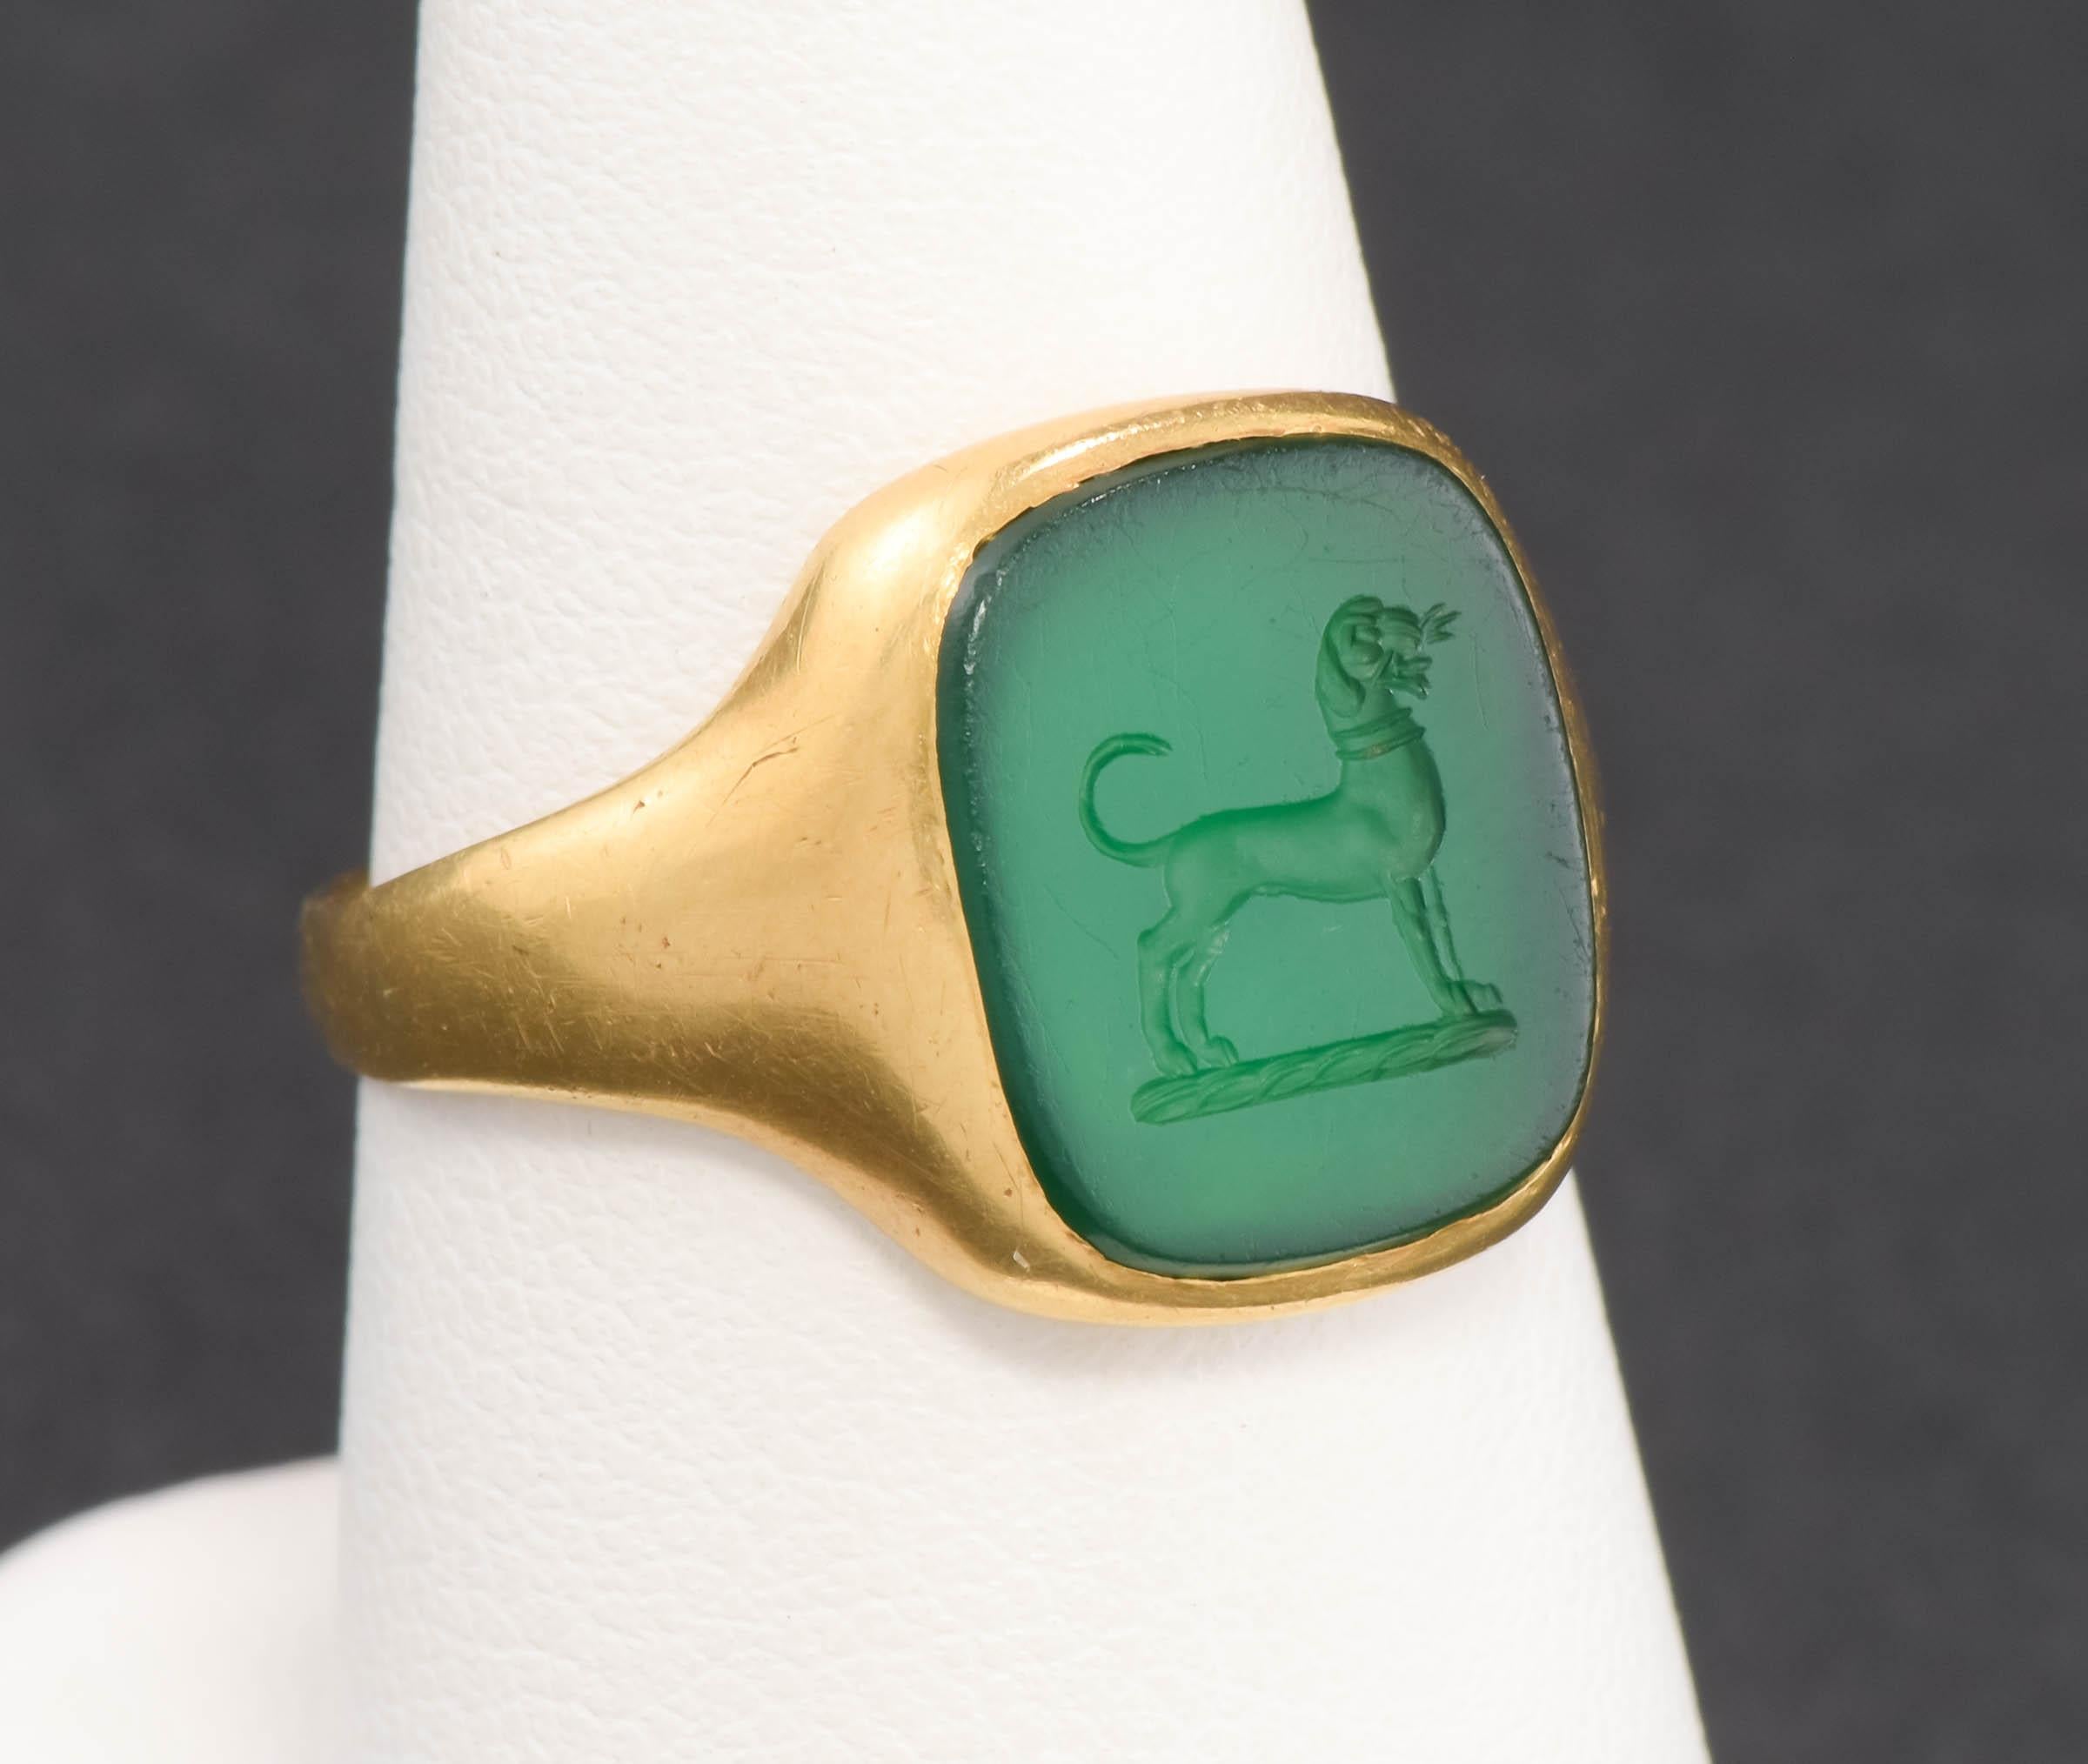 For my fellow dog lovers, I offer one of several special antique dog rings I've just found - this one a Victorian carved intaglio chalcedony dog 18K gold signet ring.  While the stone shows some superficial wear (which could be re-polished) the